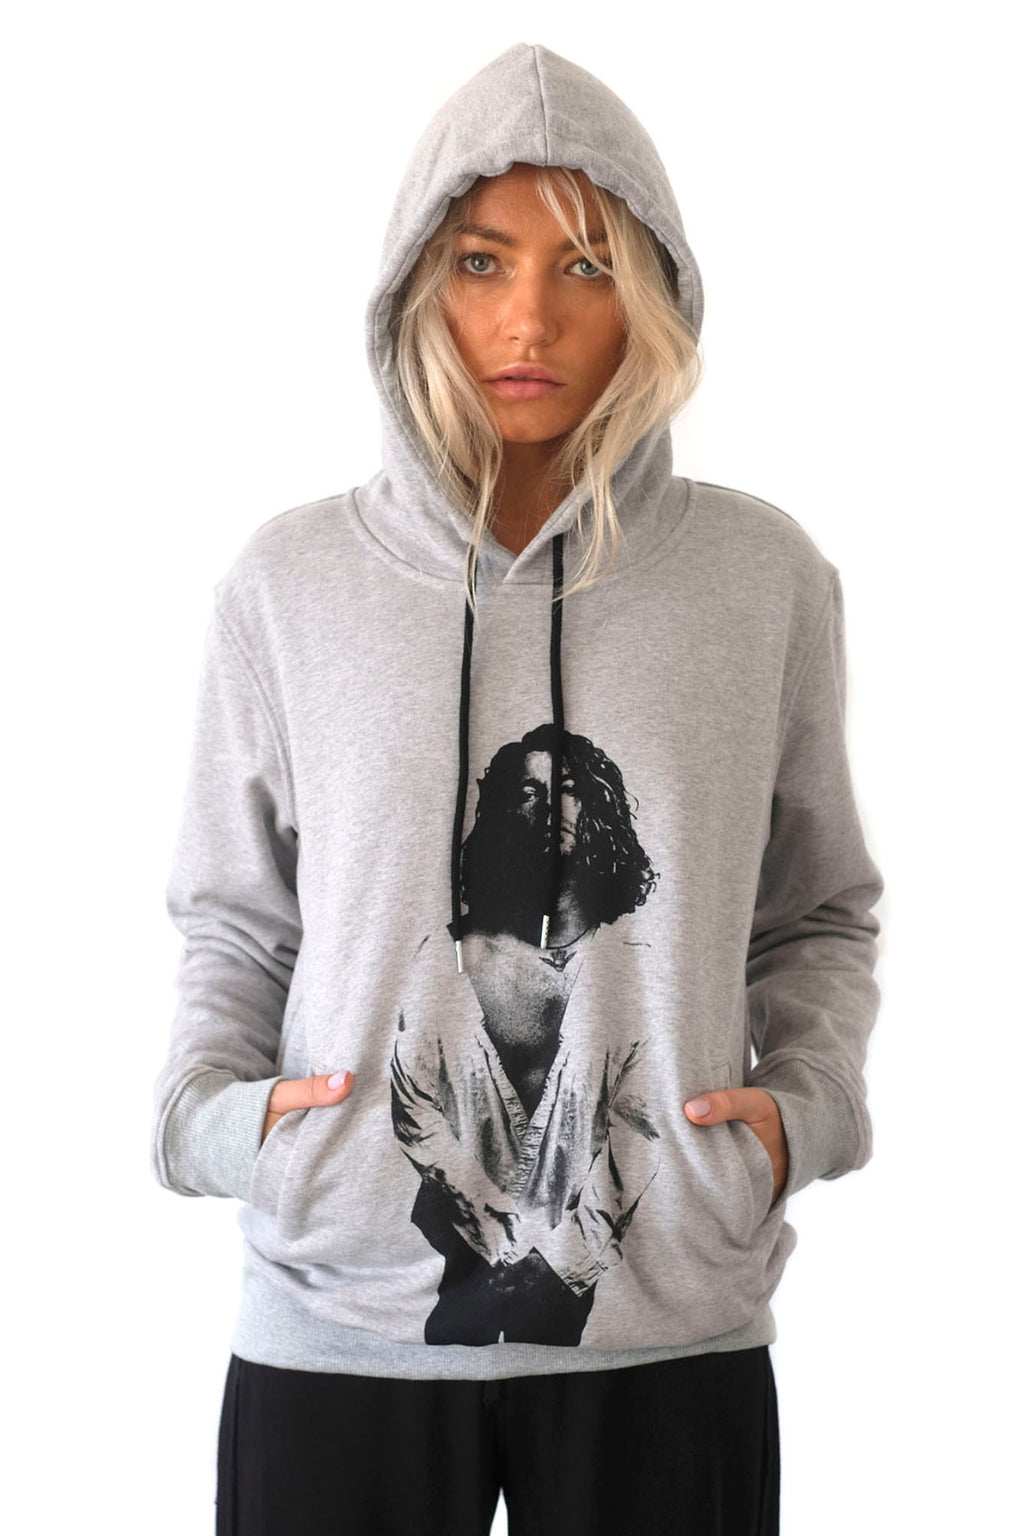 SKULL HUTCH GREY MARL WOMEN HOODIE SWEATER PULLOVER FRONT